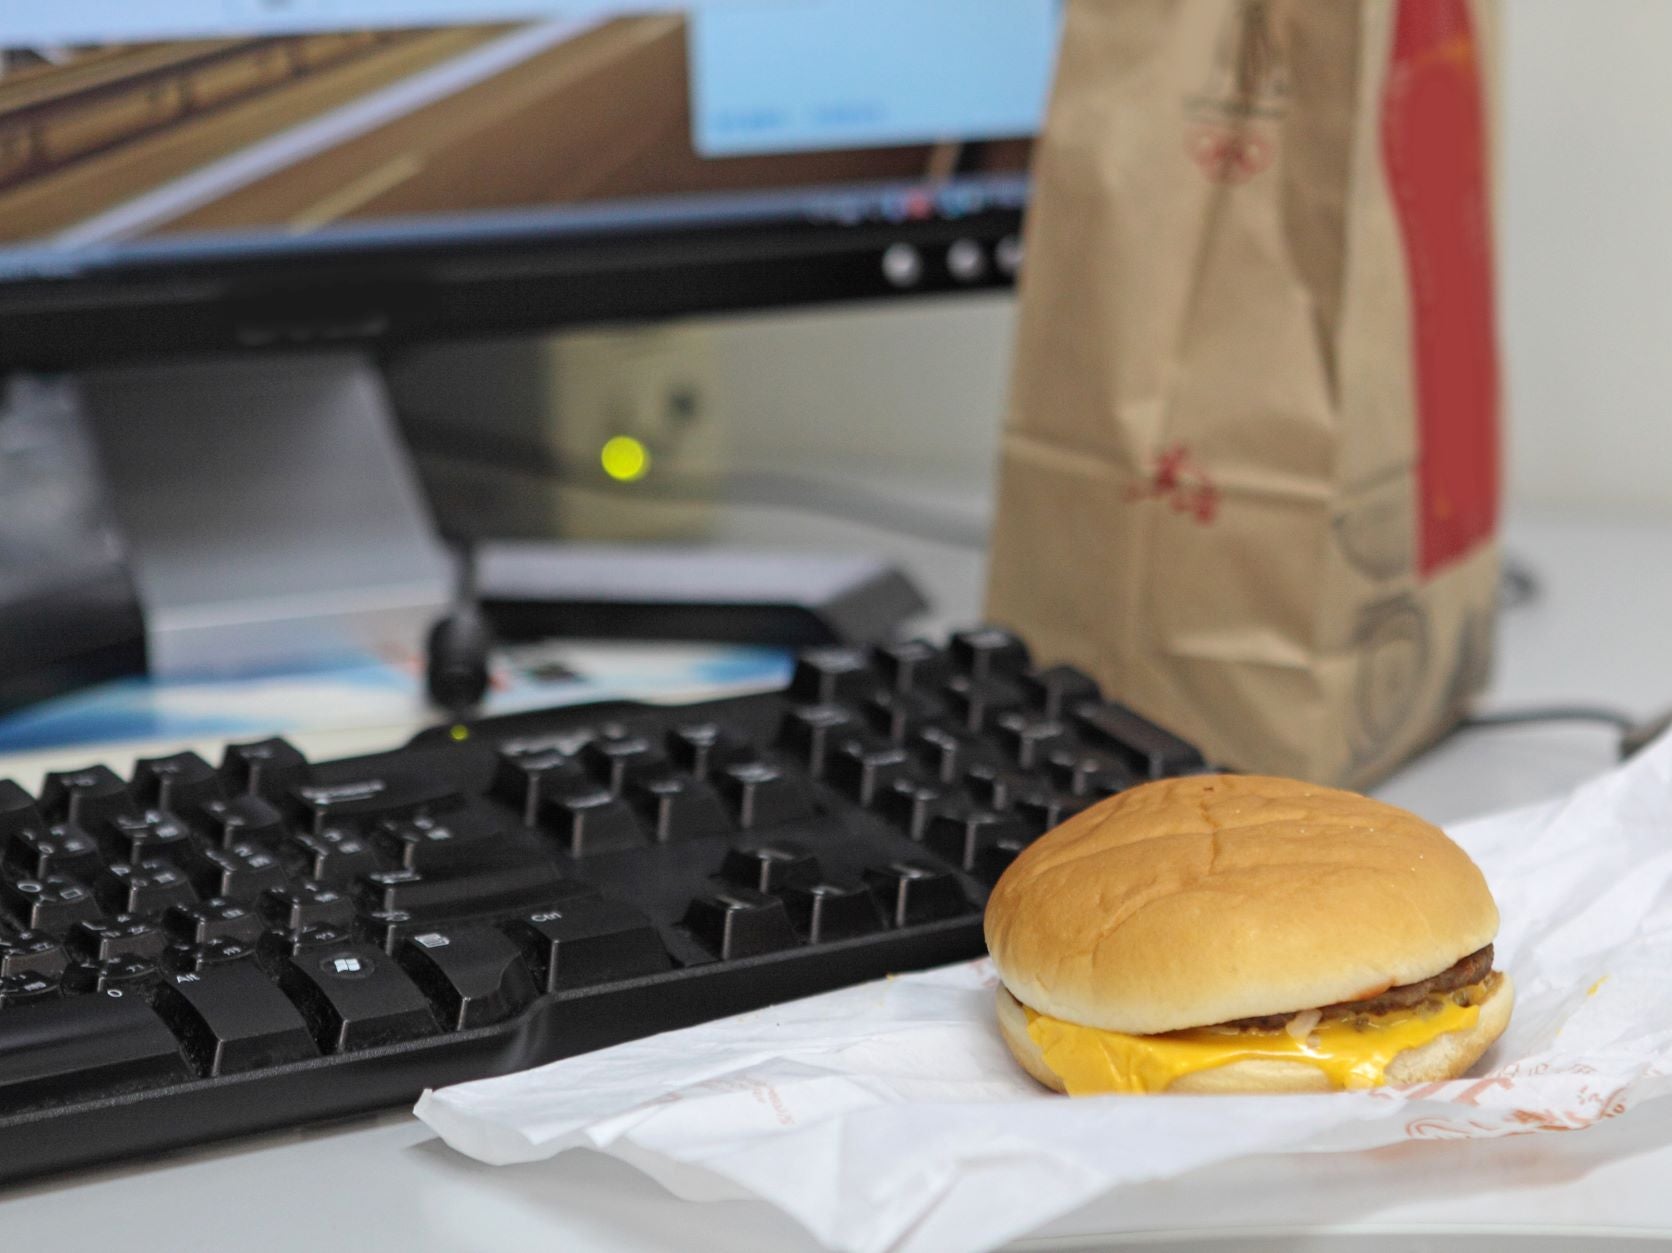 Poor Diet might lead to sleeping too much, fast food lunch in front of computer at desk